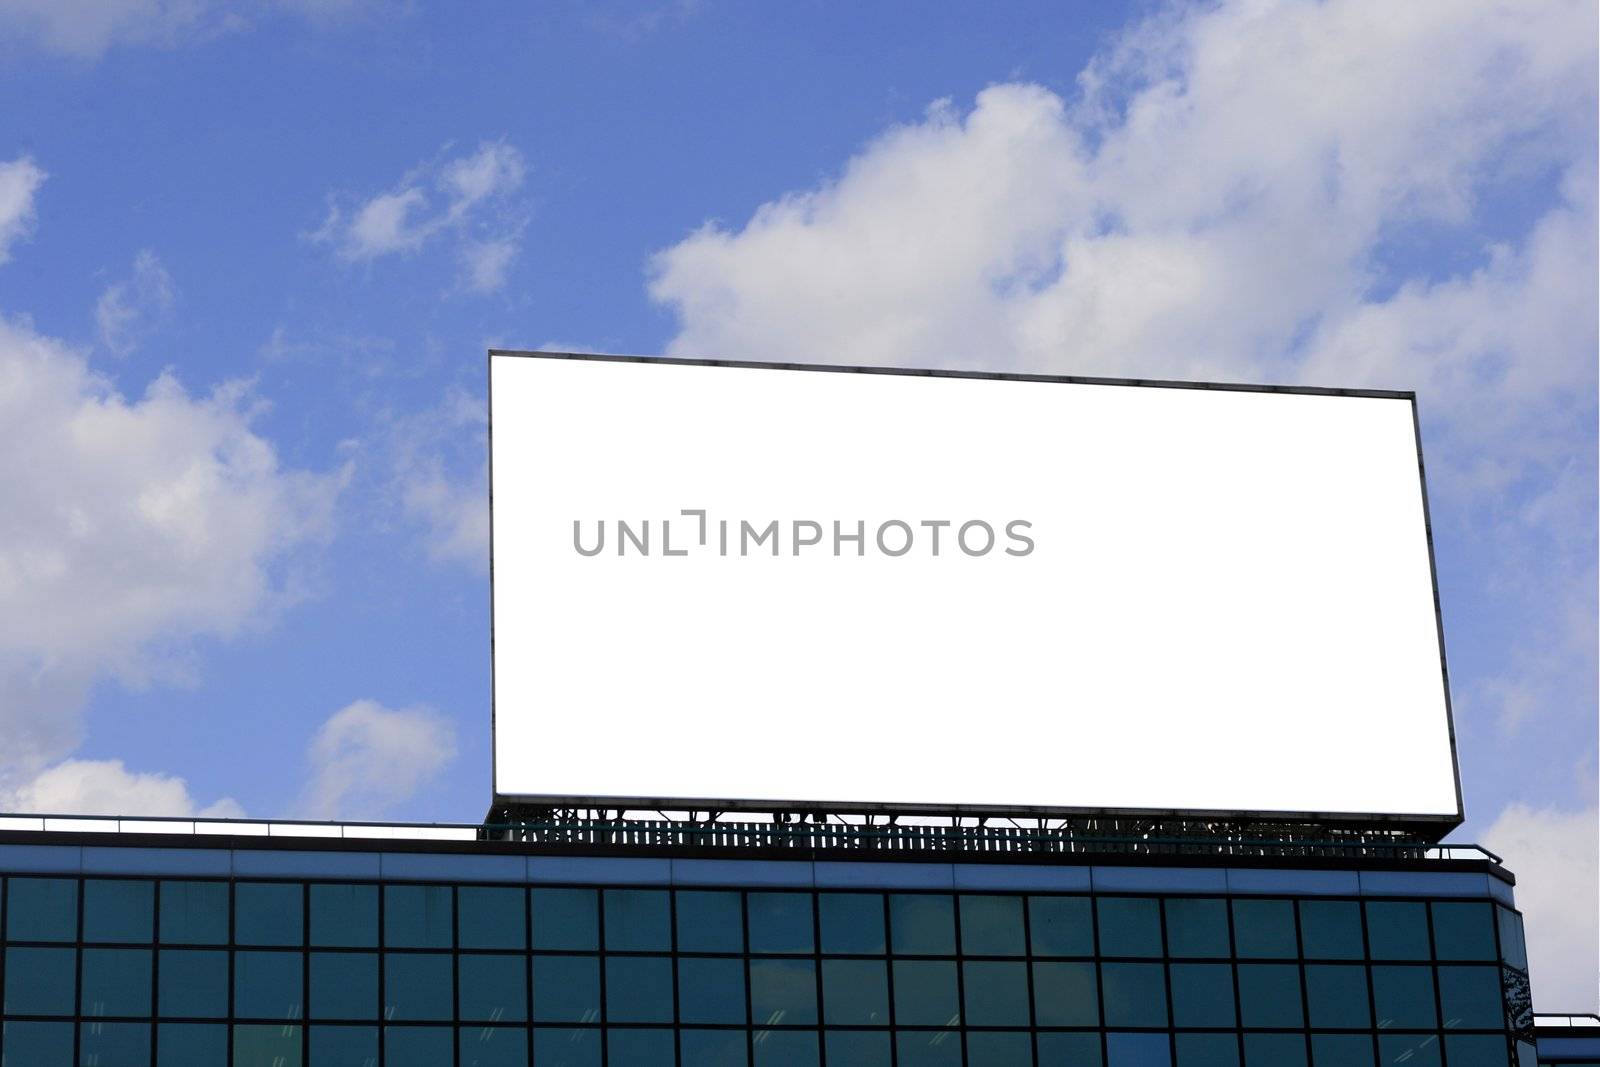 Blank Billboard  on top of a building in a blue sky background